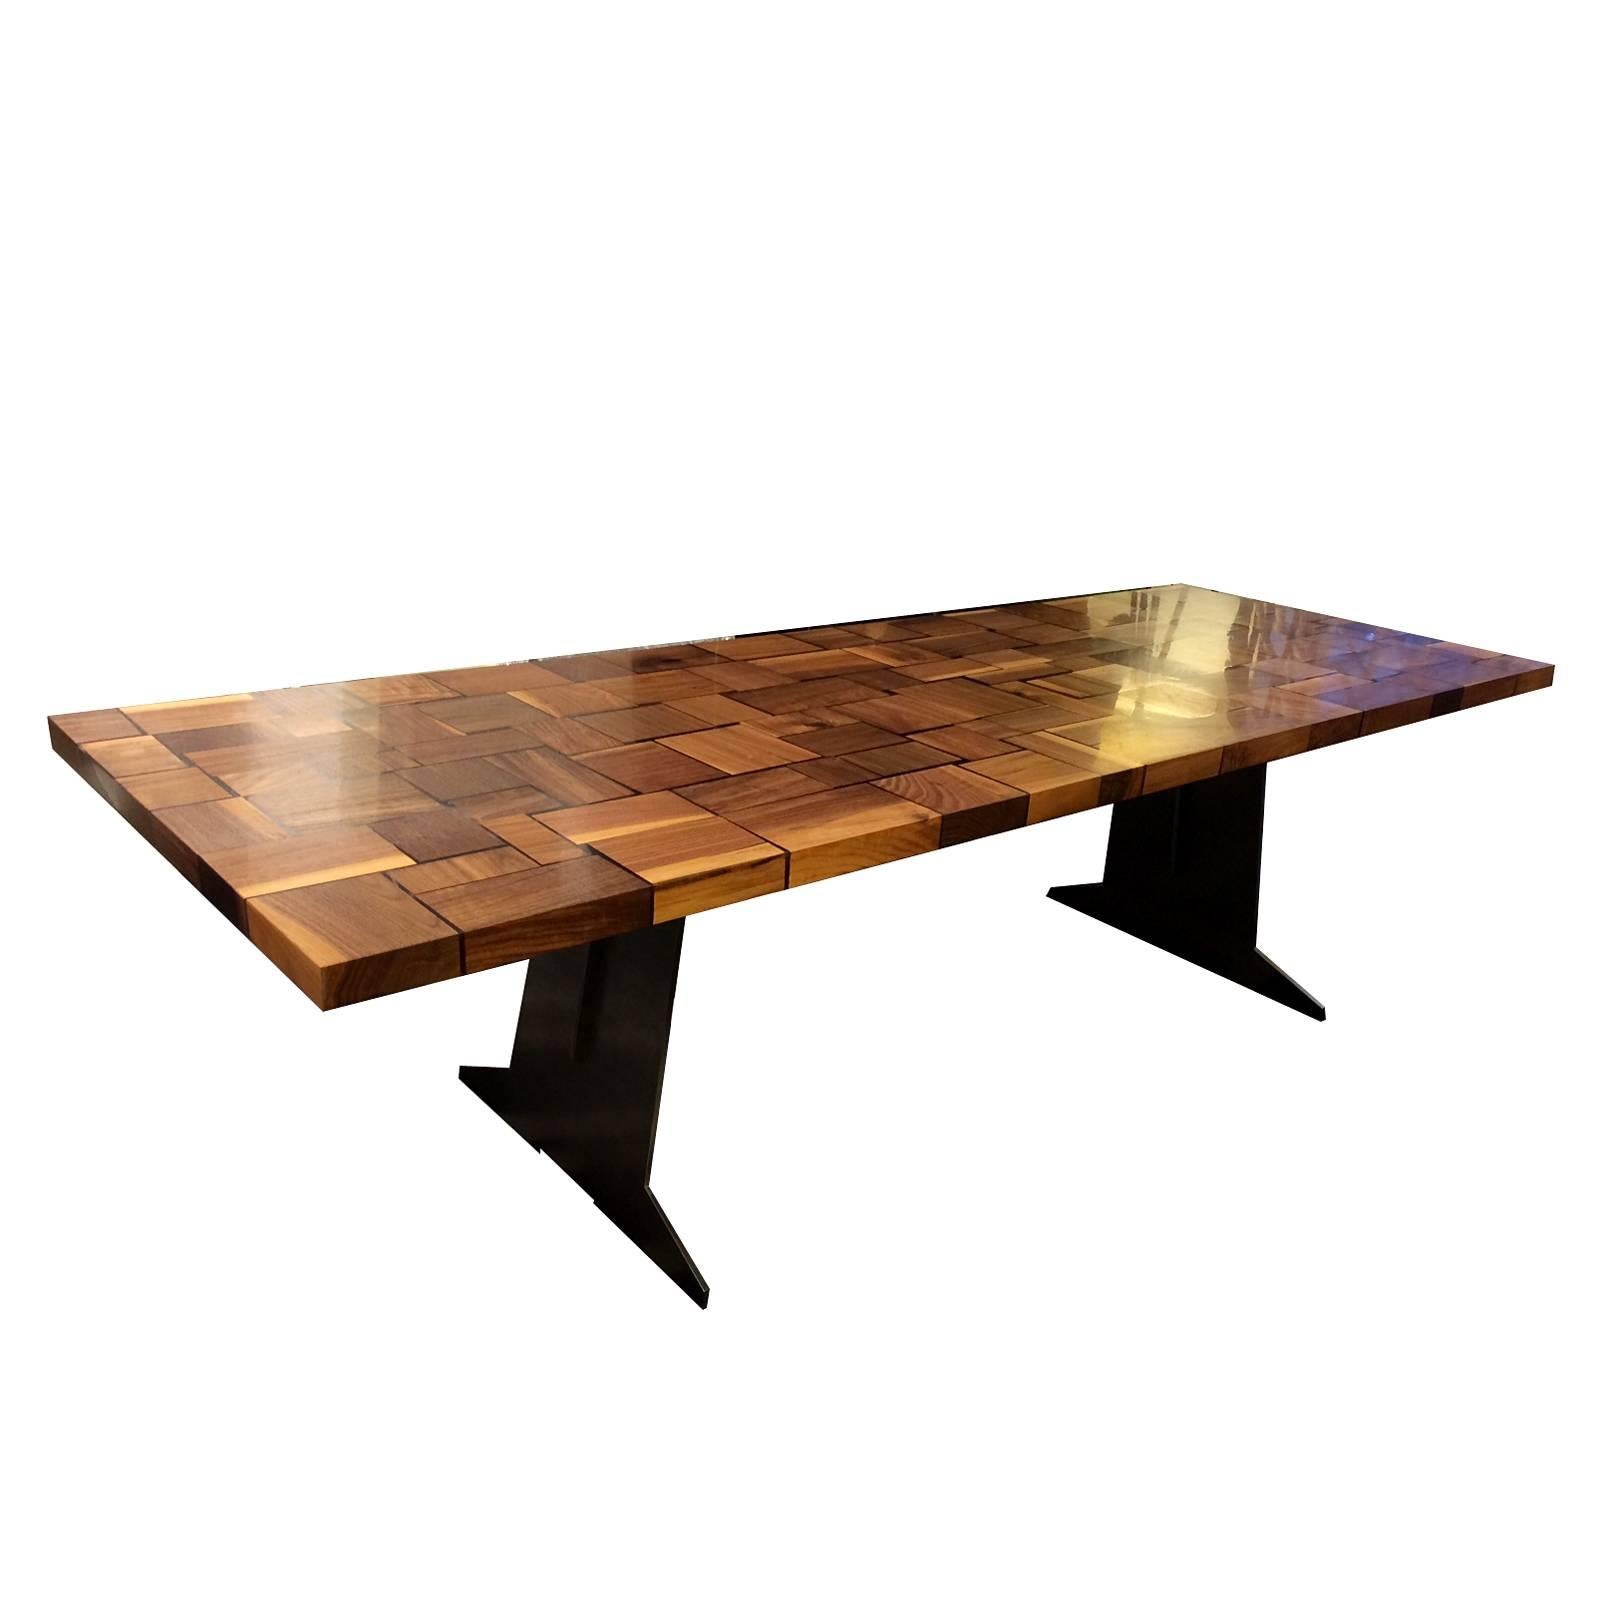 Table square wood composed of many squared blocks of
solid wood processed with resin. Mosaic Top on Iron base
with 2 feet. Wood treated with natural wax of vegetable
origin with pine extracts finish.
